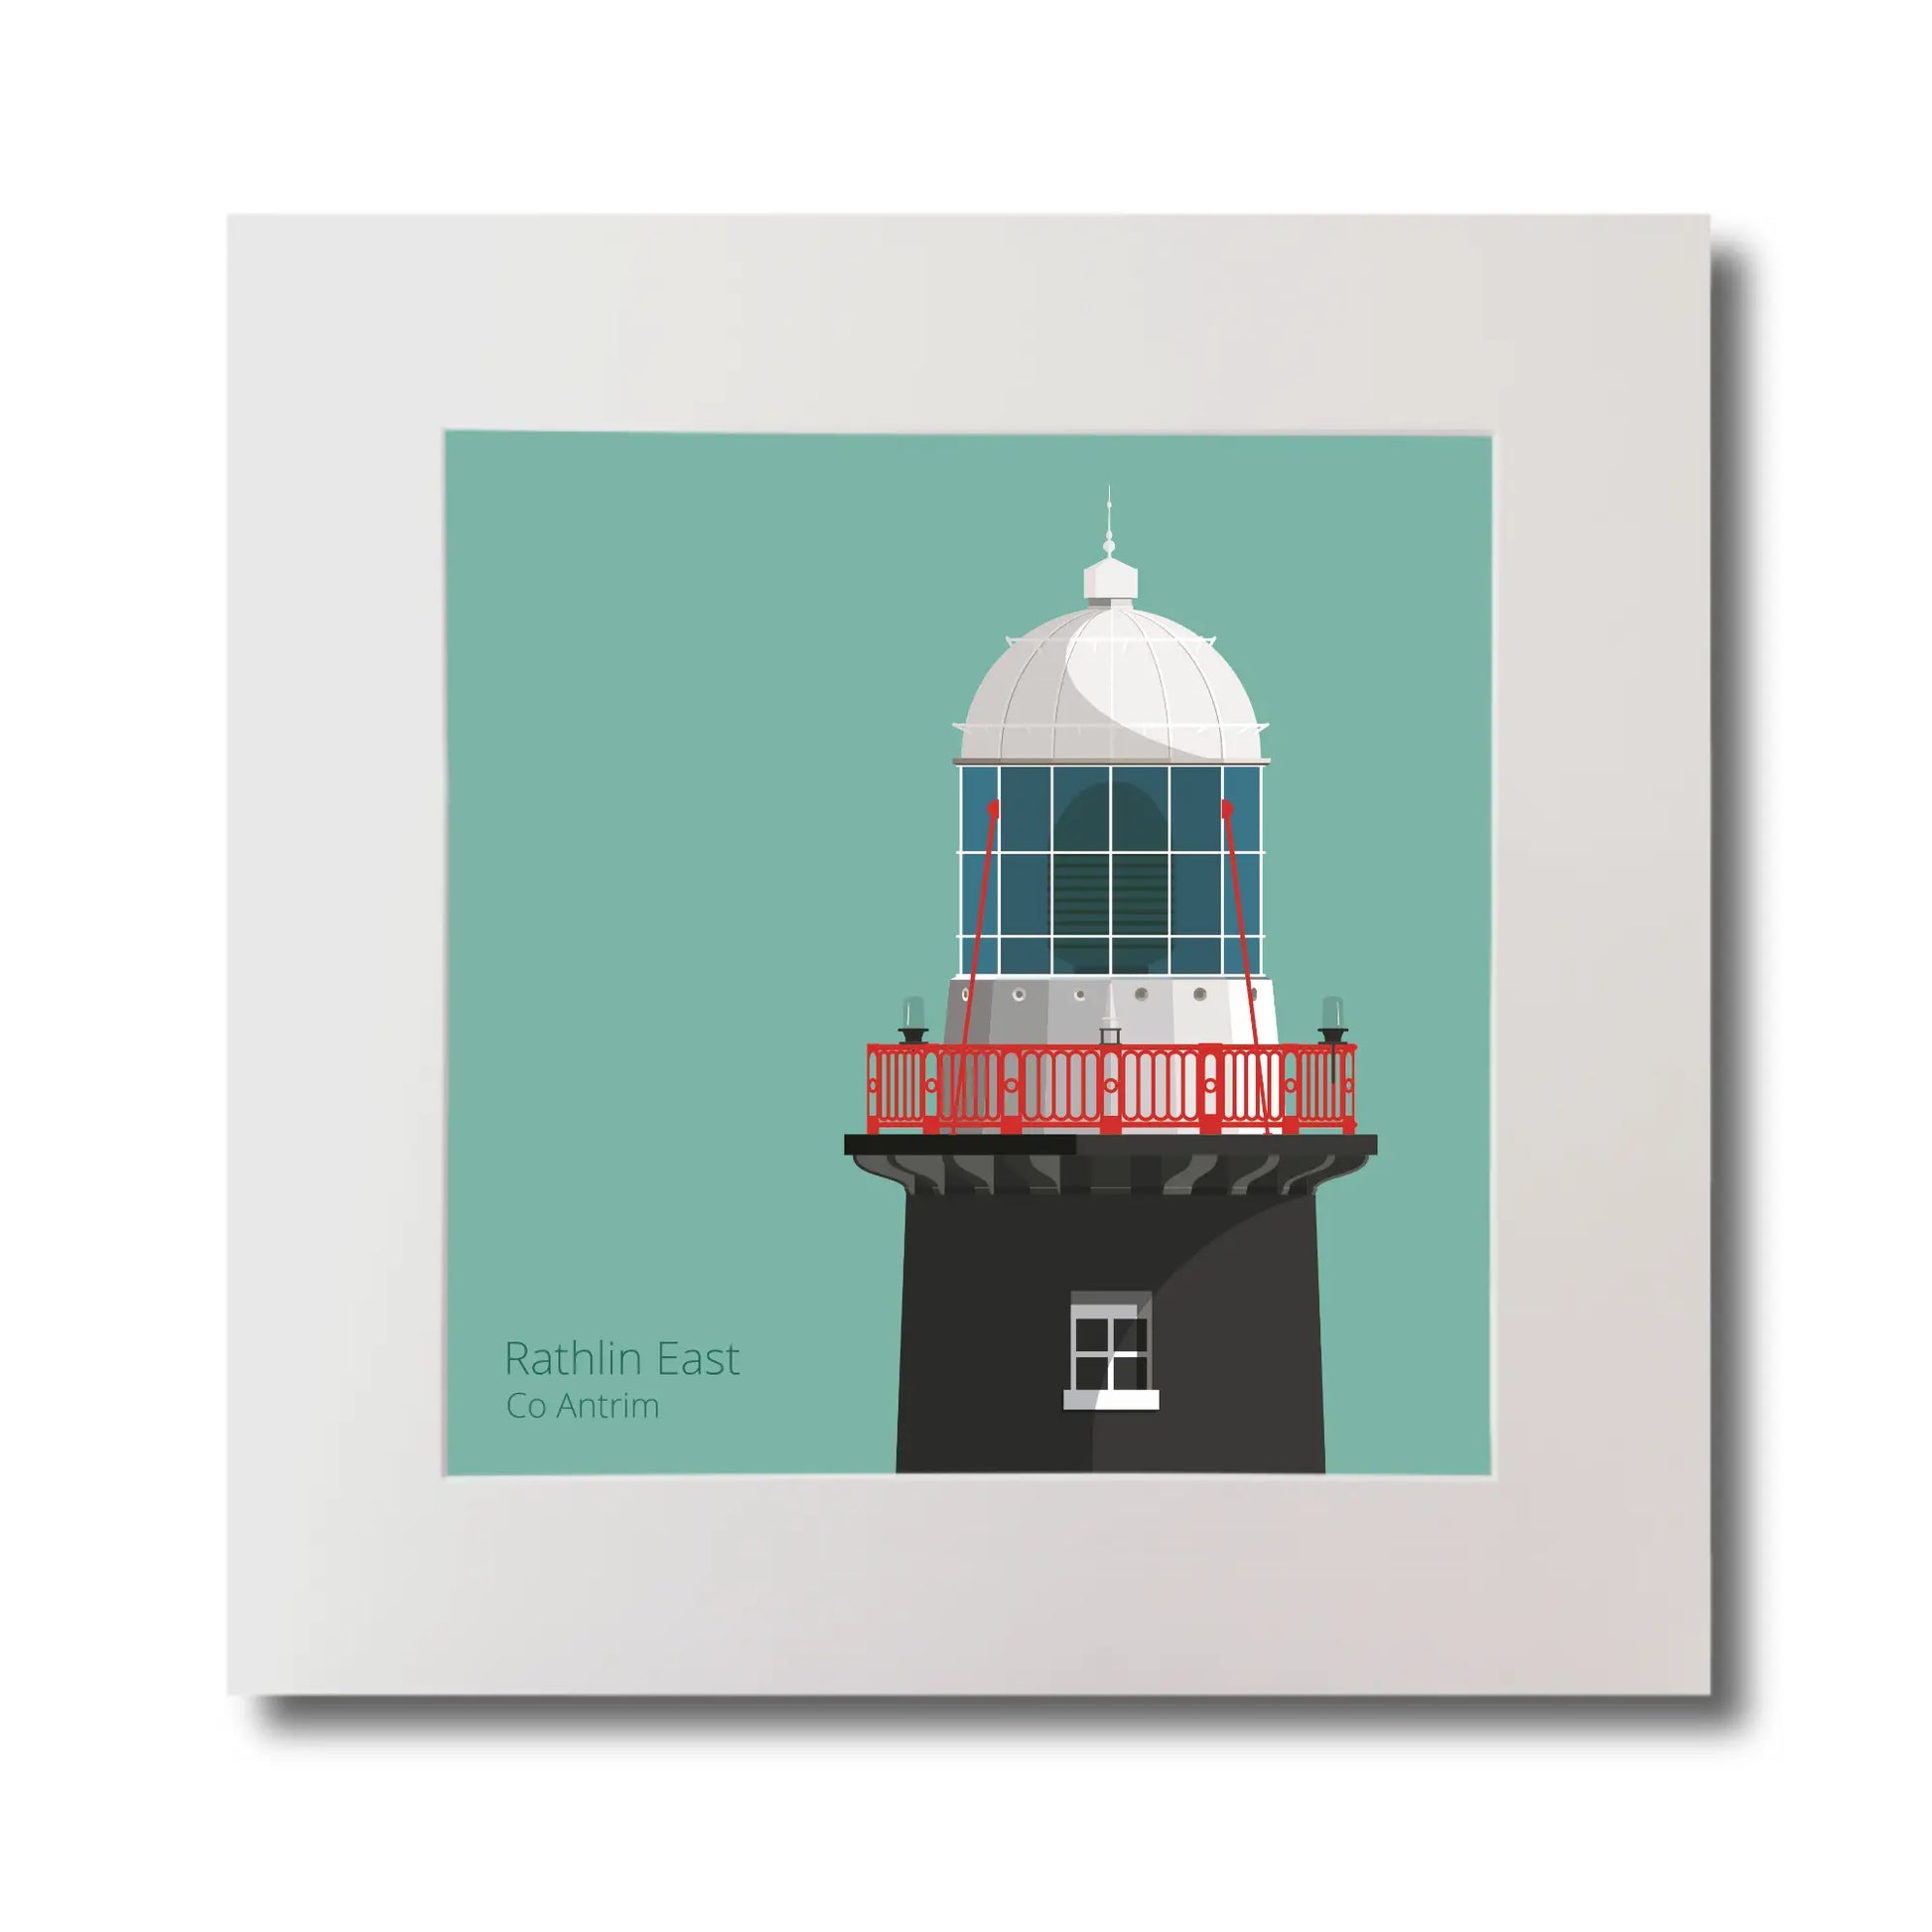 Illustration of Rathlin East lighthouse on an ocean green background, mounted and measuring 30x30cm.